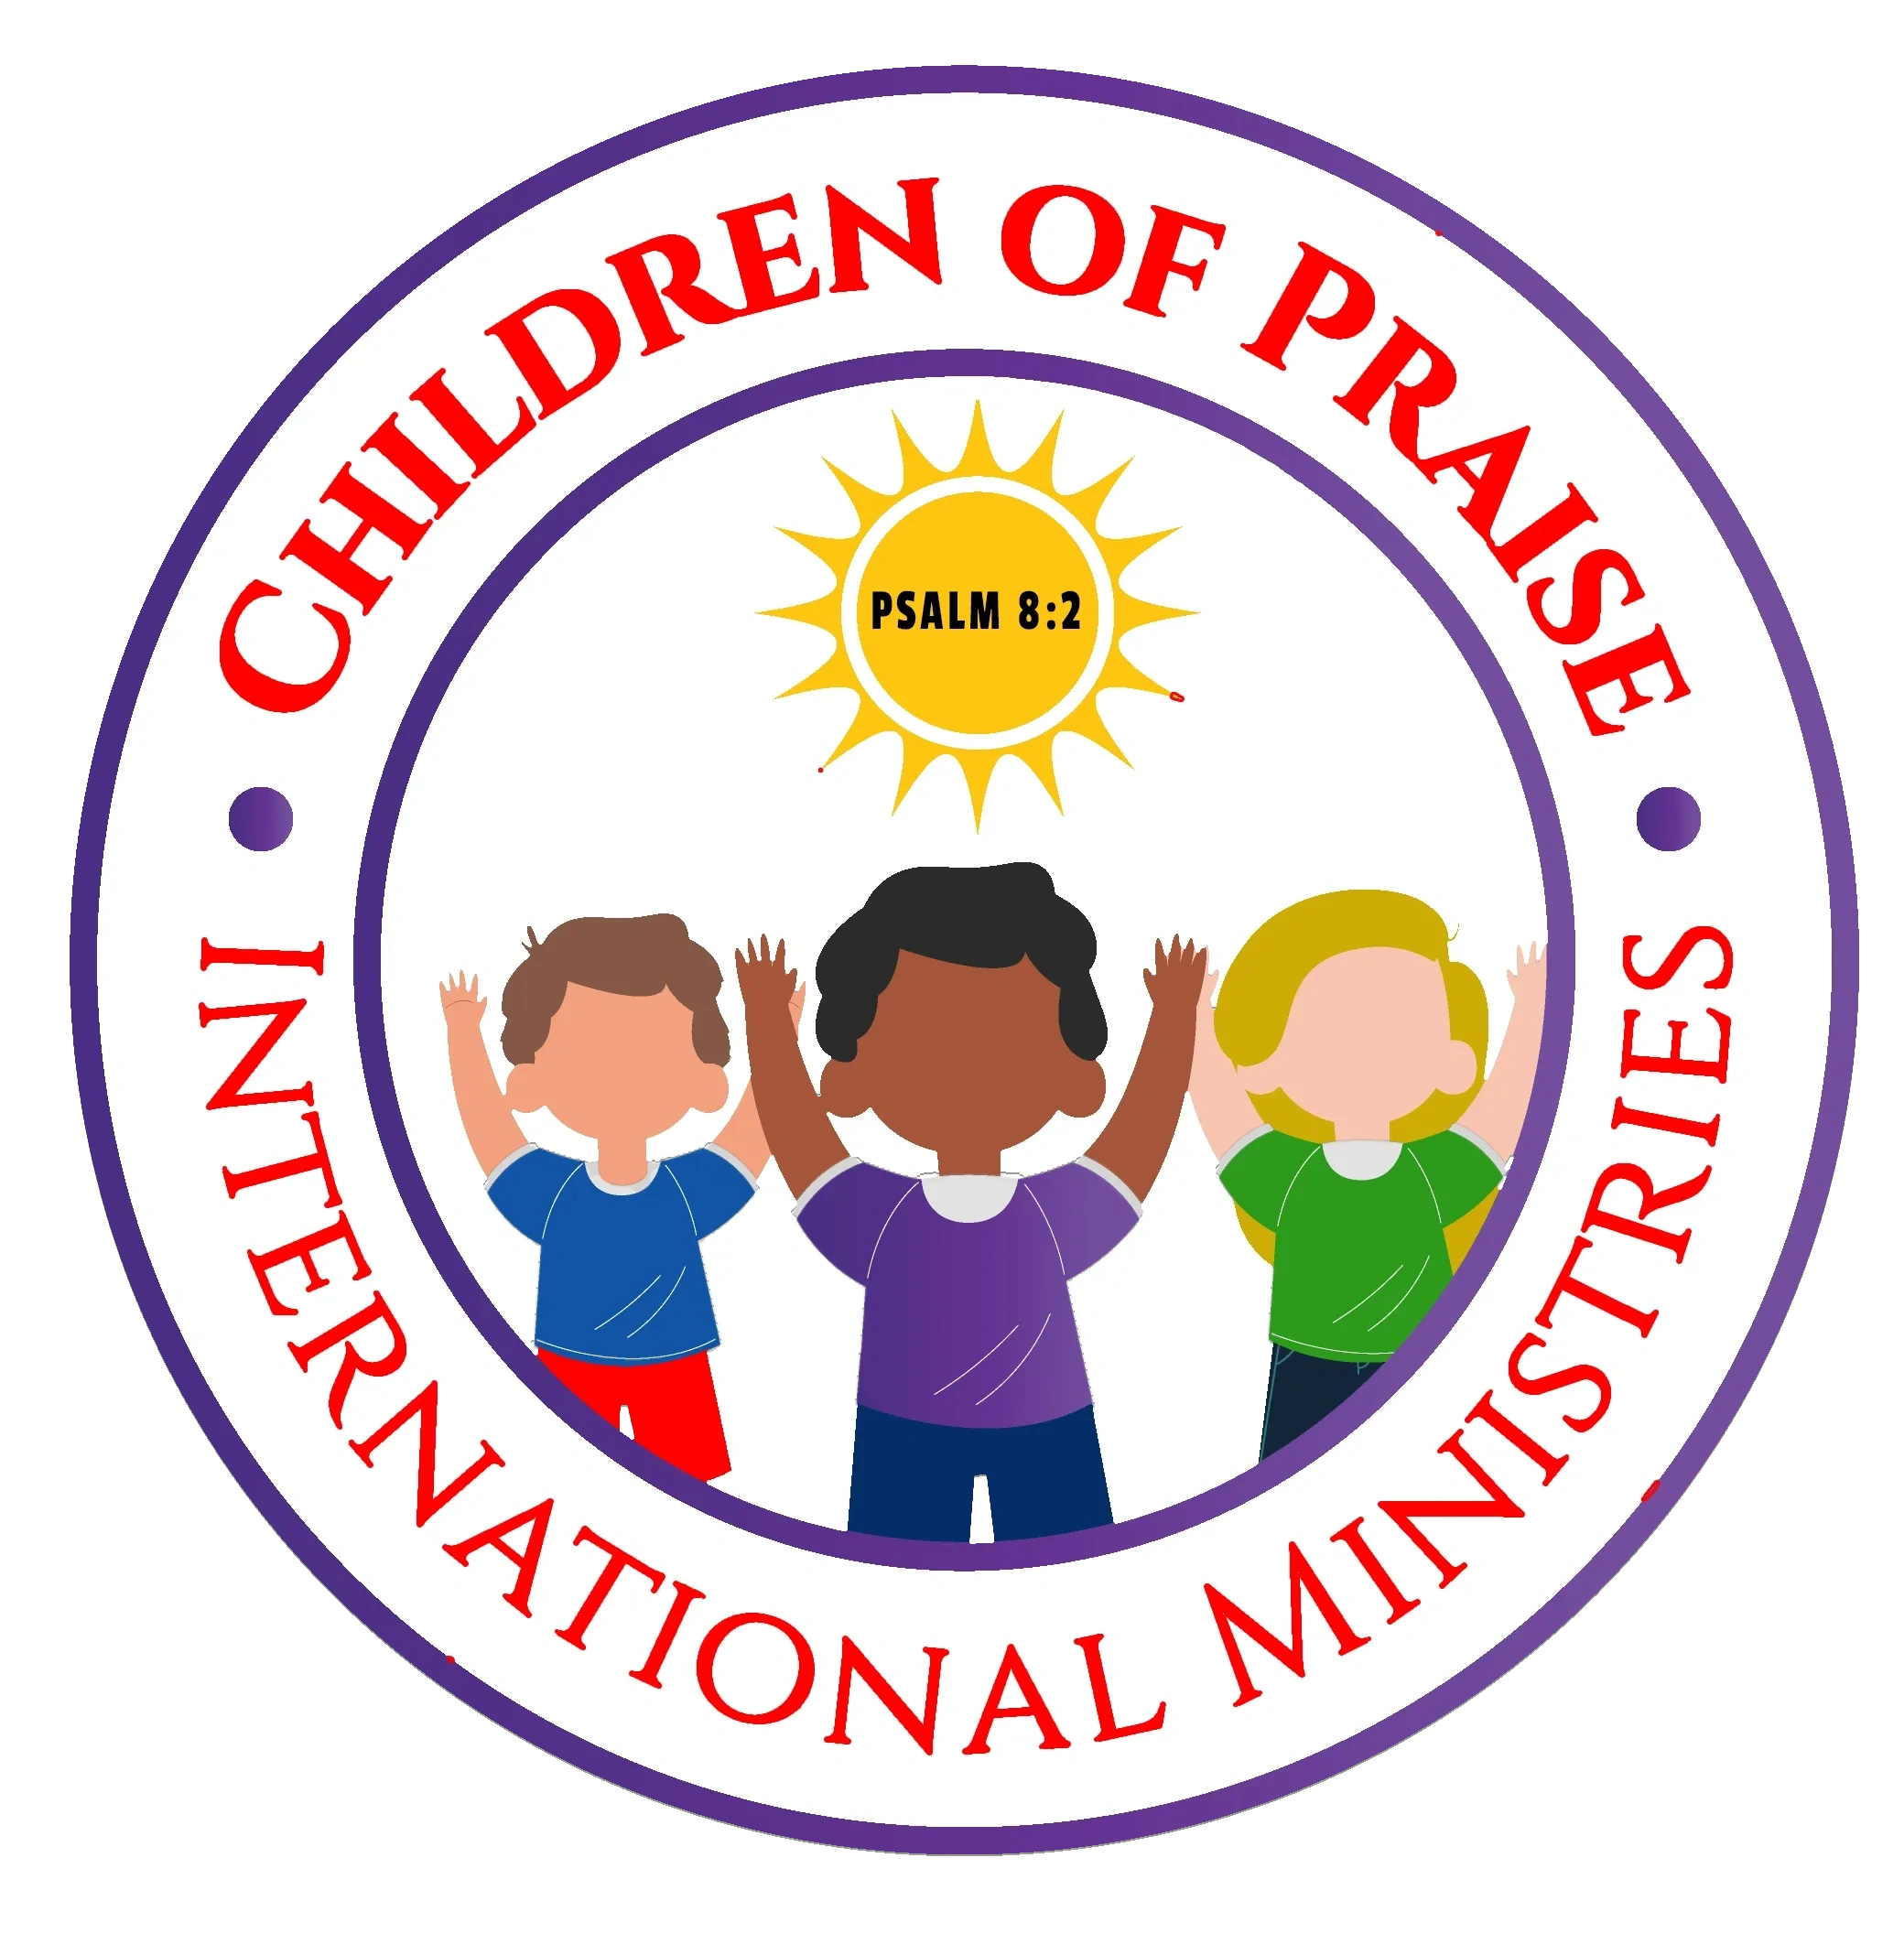 Children of different ethnicities worshipping God